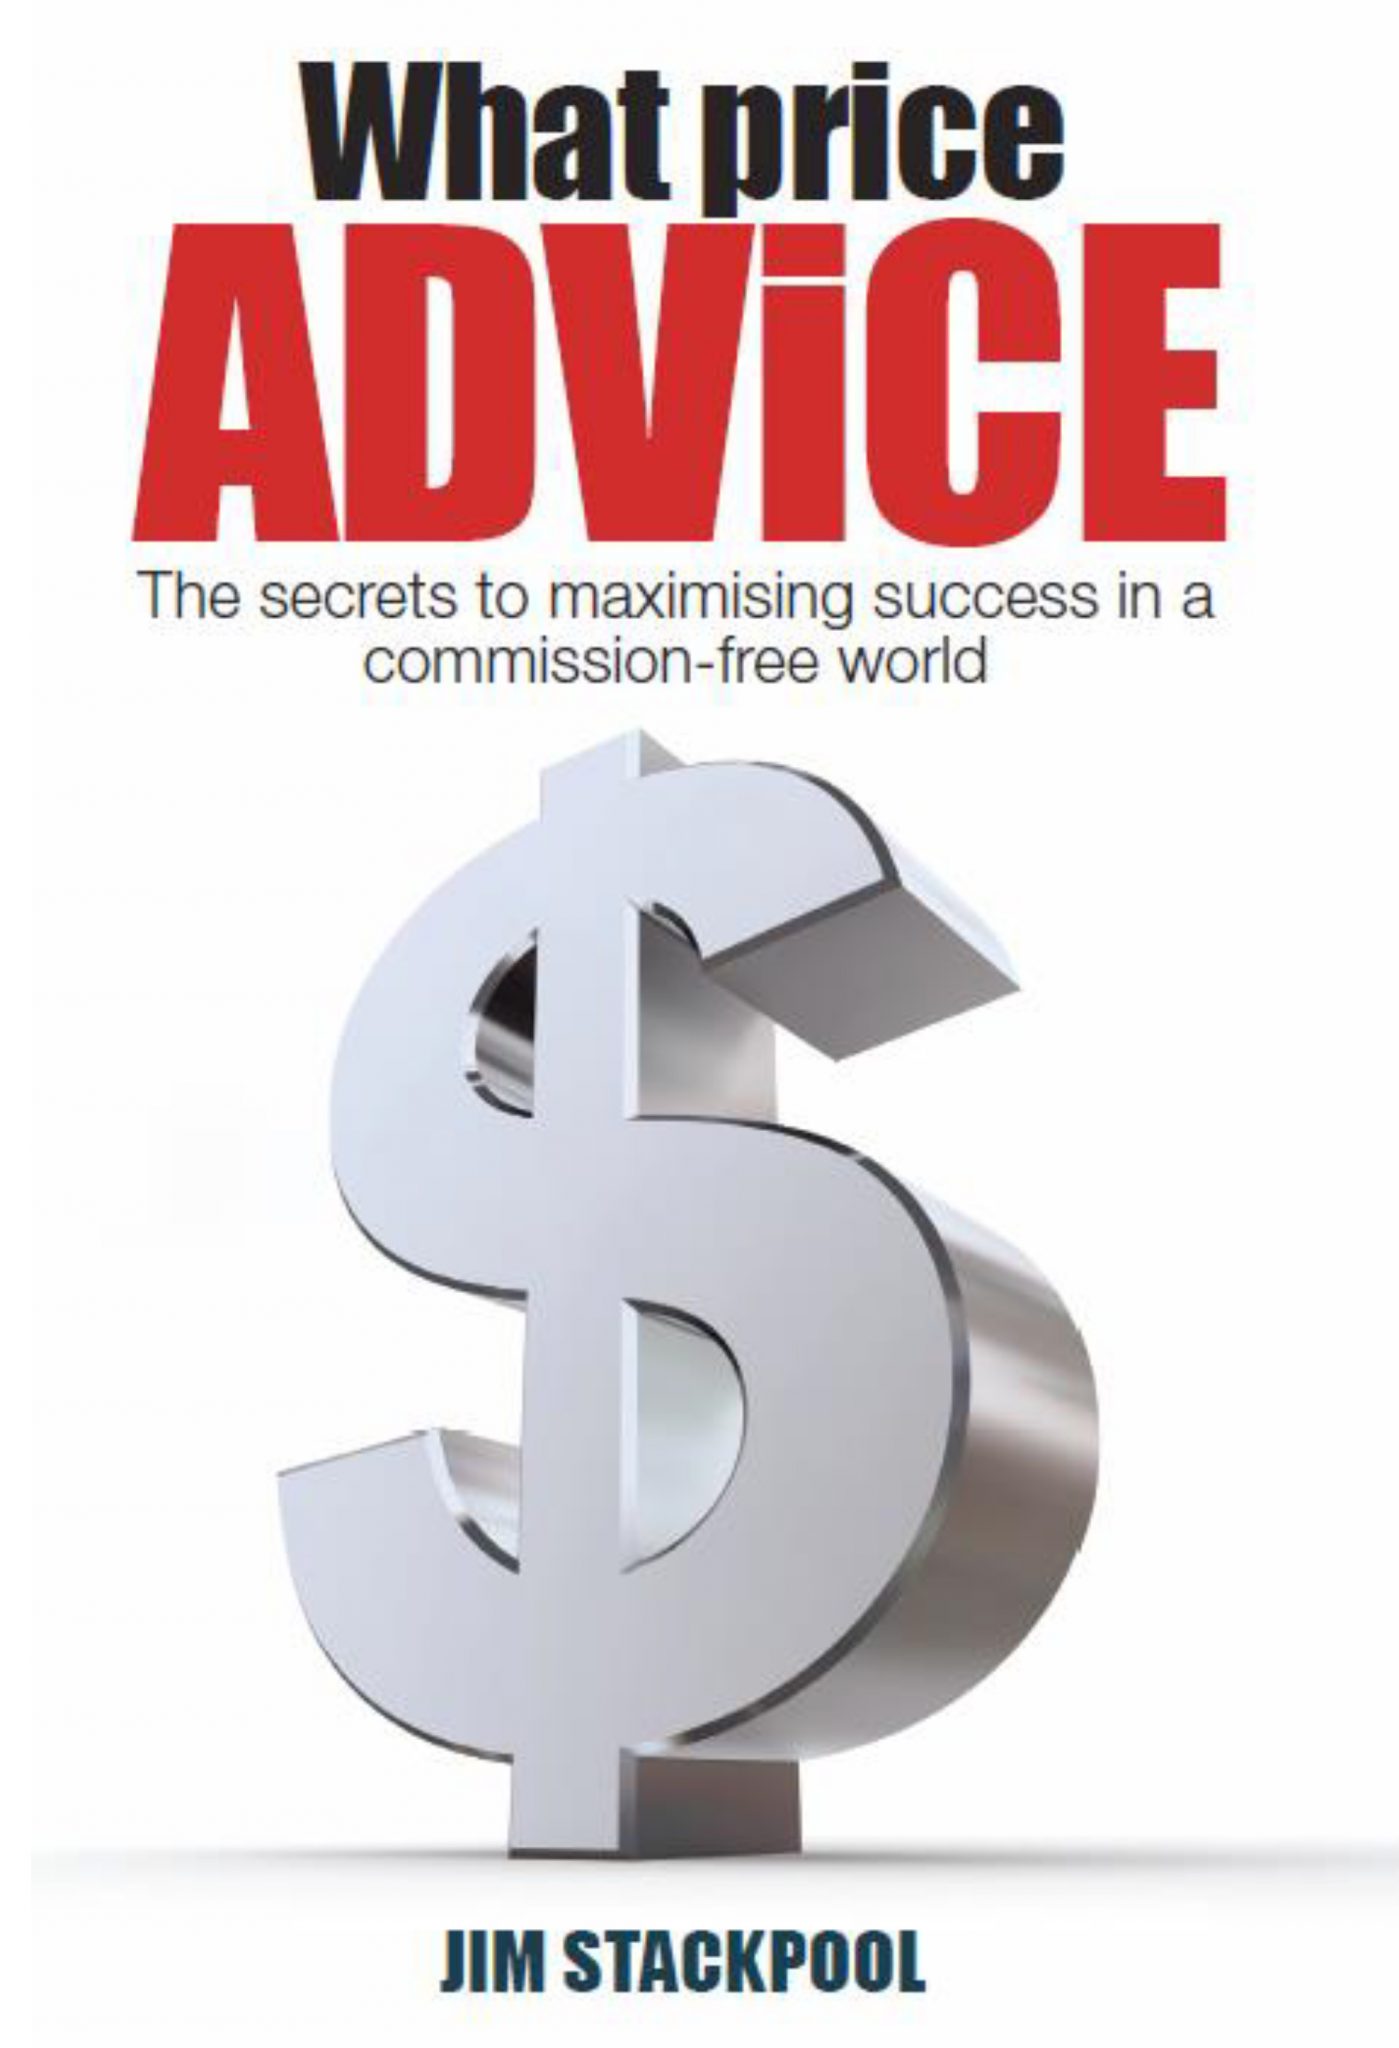 What Price Advice by Jim Stackpool